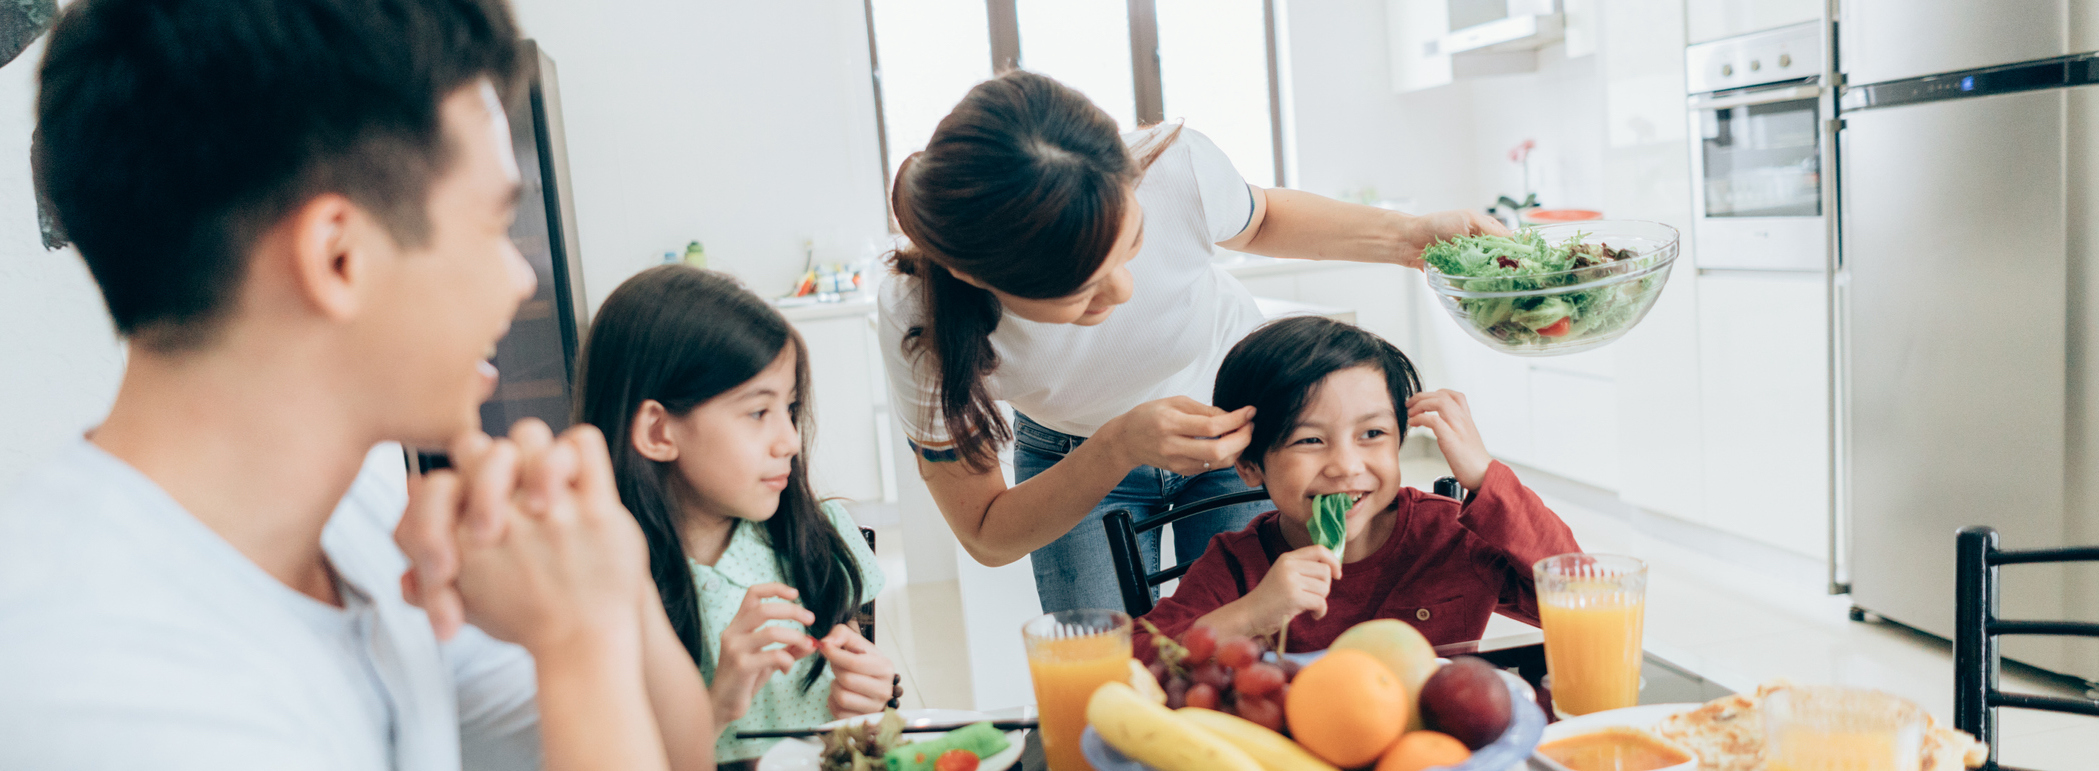 Family convenes around healthy lunch displaying interplay of food and mood